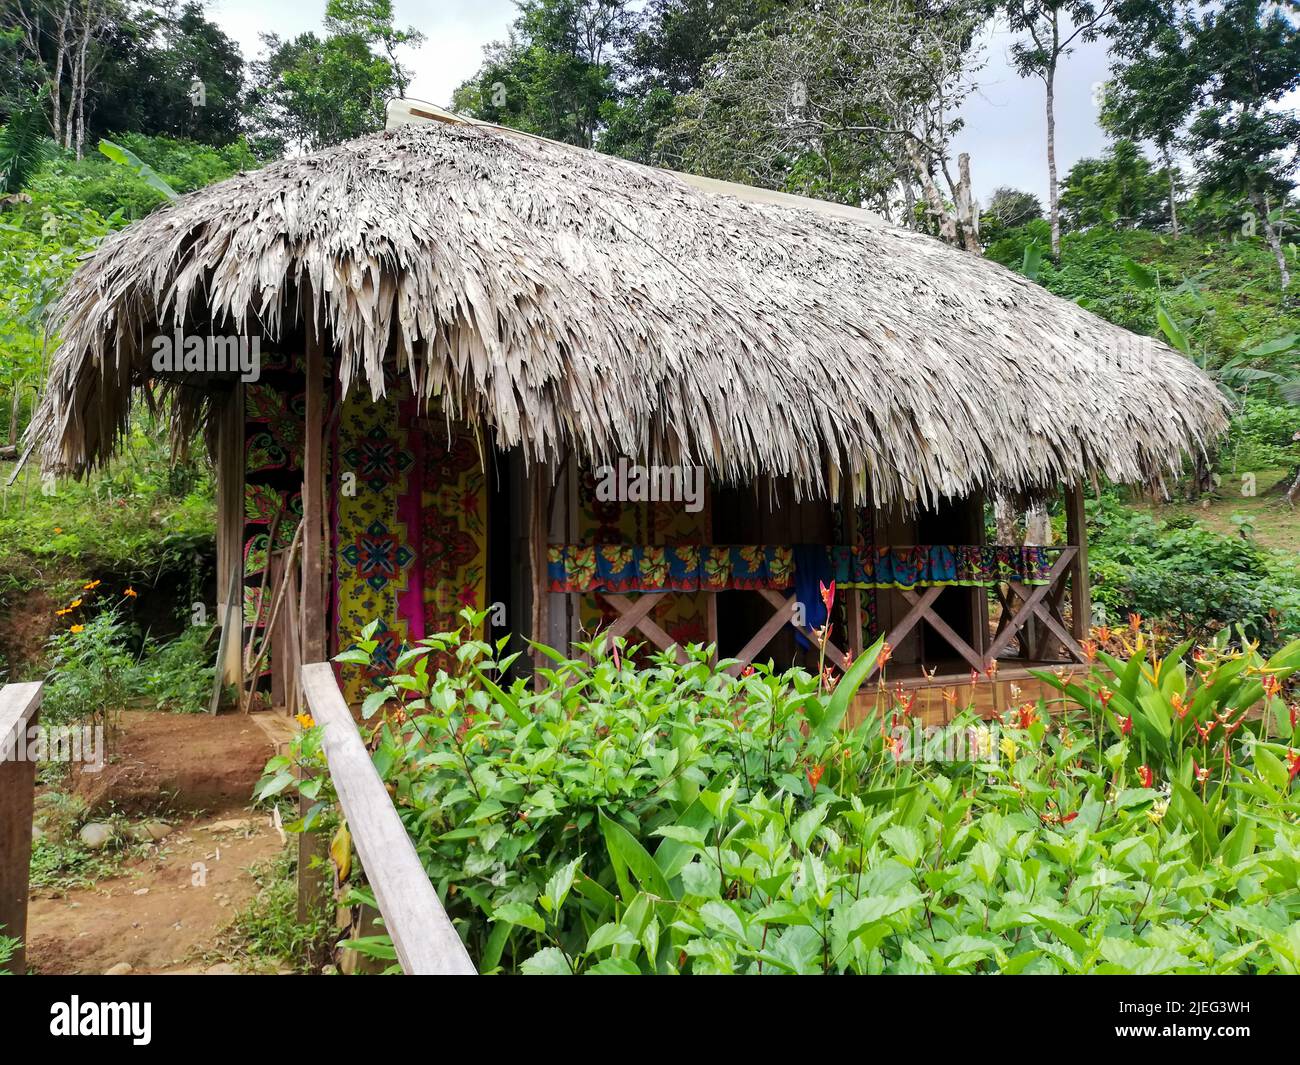 Traditional wooden hut with reed roof at the island of Colon, in Bocas del Toro archipelago, Panama, Central America. Stock Photo